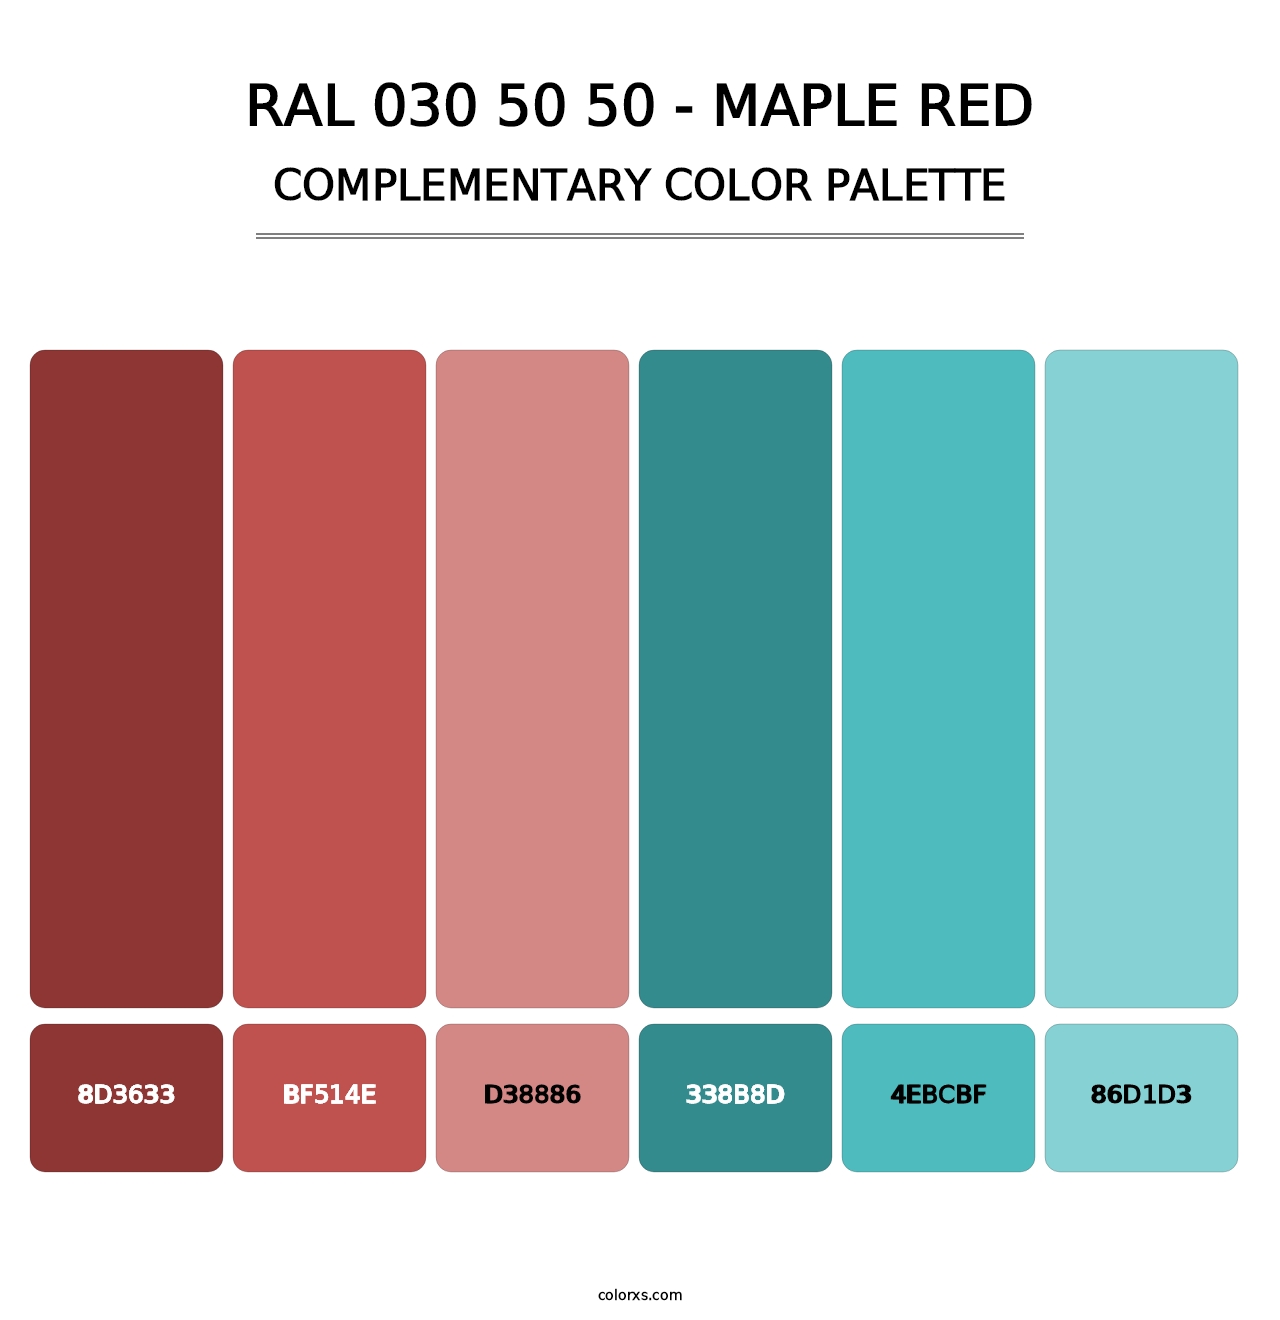 RAL 030 50 50 - Maple Red - Complementary Color Palette